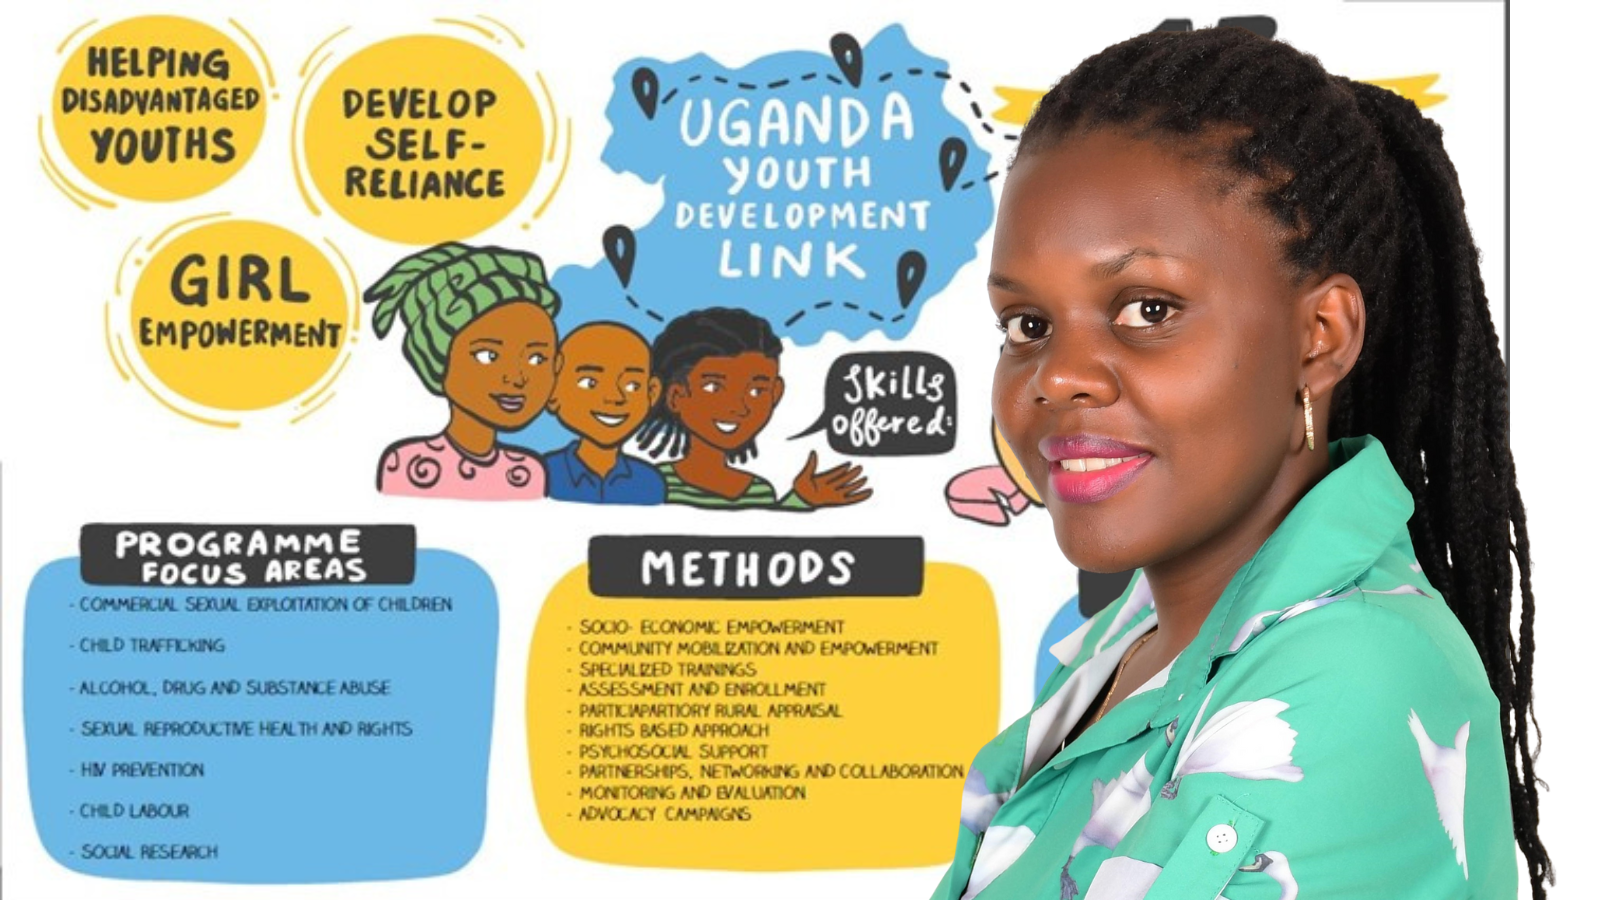 Uganda Youth Development Link (UYDL) - Empowering Young People for Action in Uganda